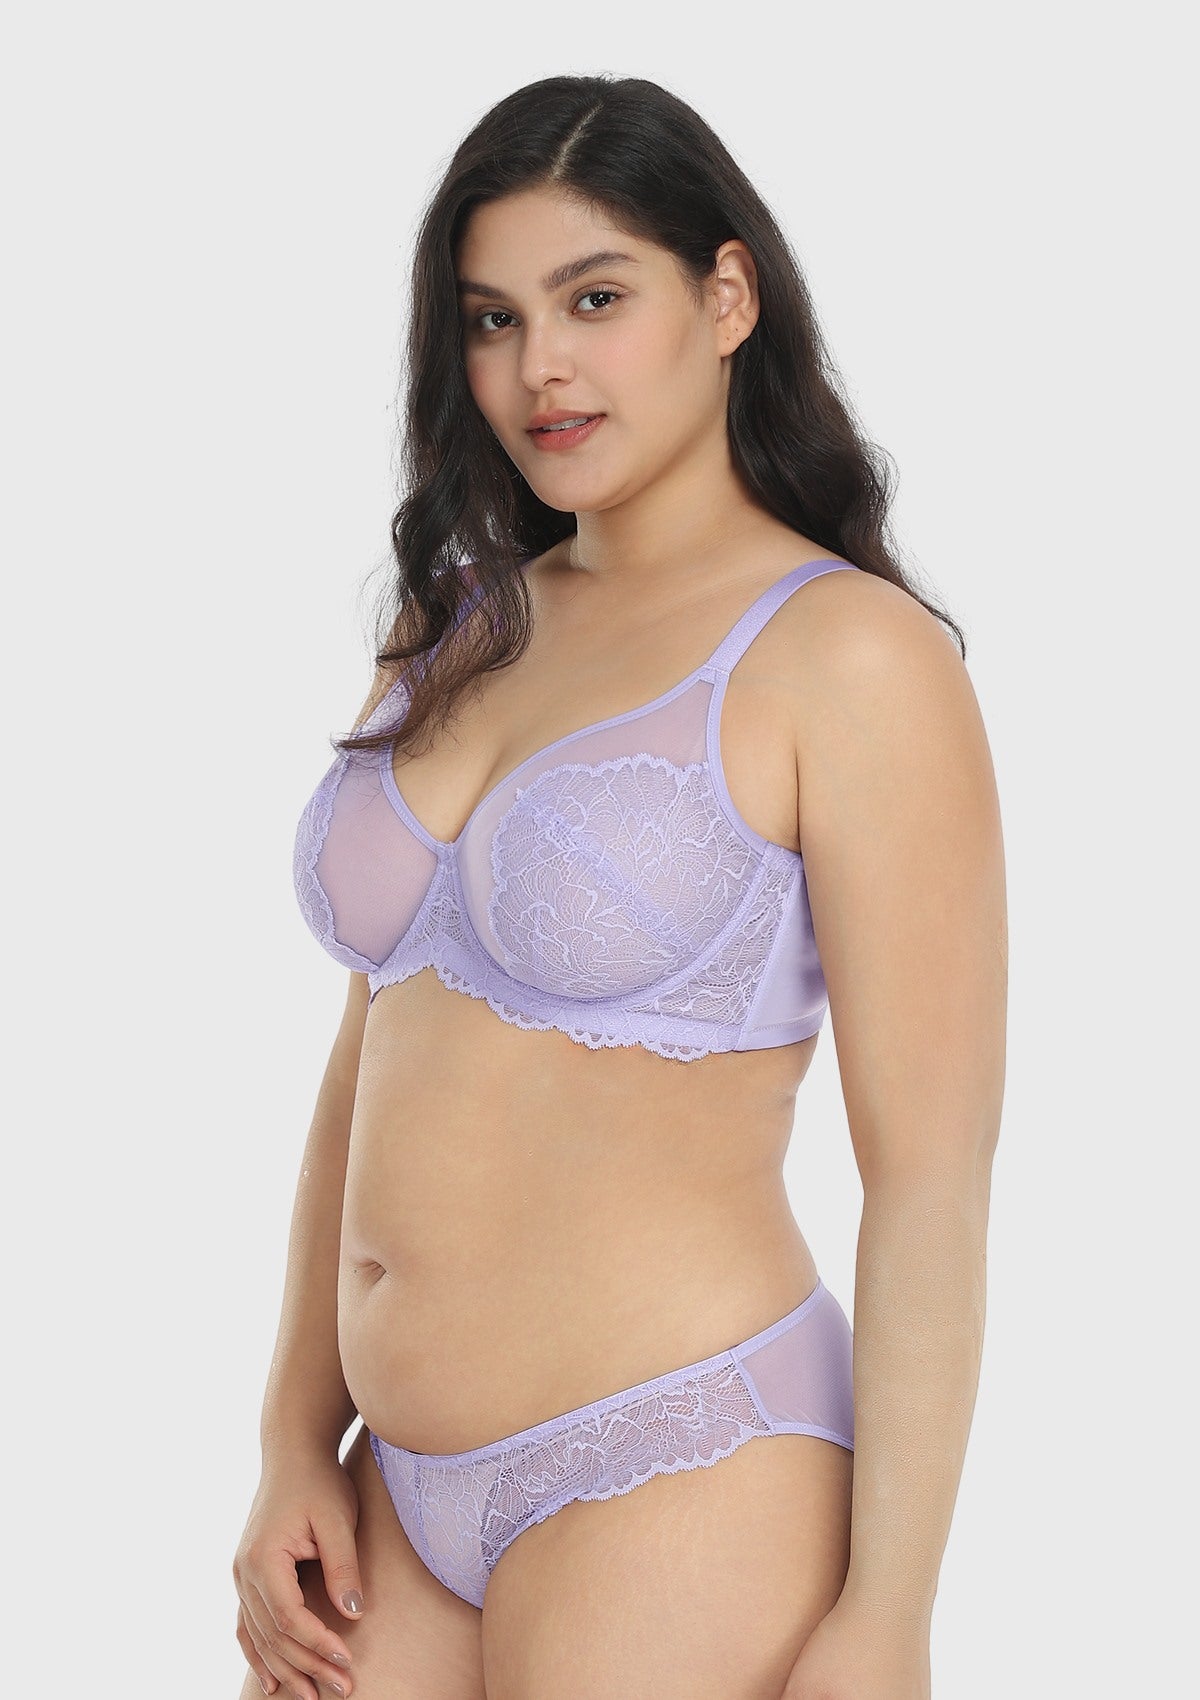 HSIA Blossom Transparent Lace Bra: Plus Size Wired Back Smoothing Bra - Purple / 36 / C